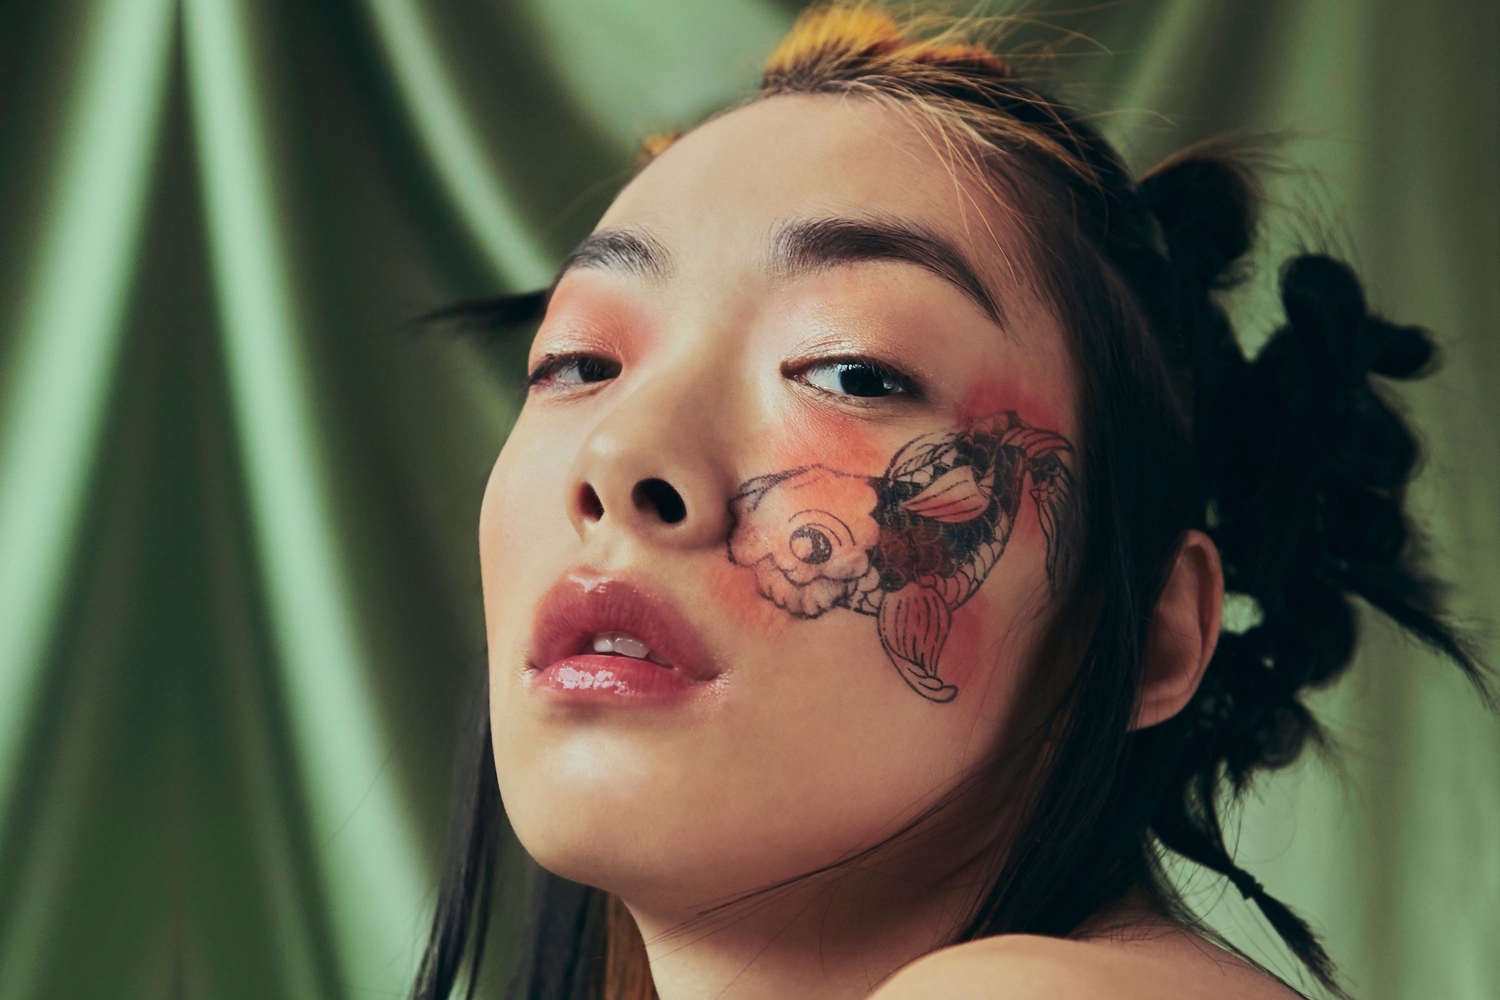 Rina Sawayama: “Us pop girls are really trying to lift 2020 in the only way we can!”